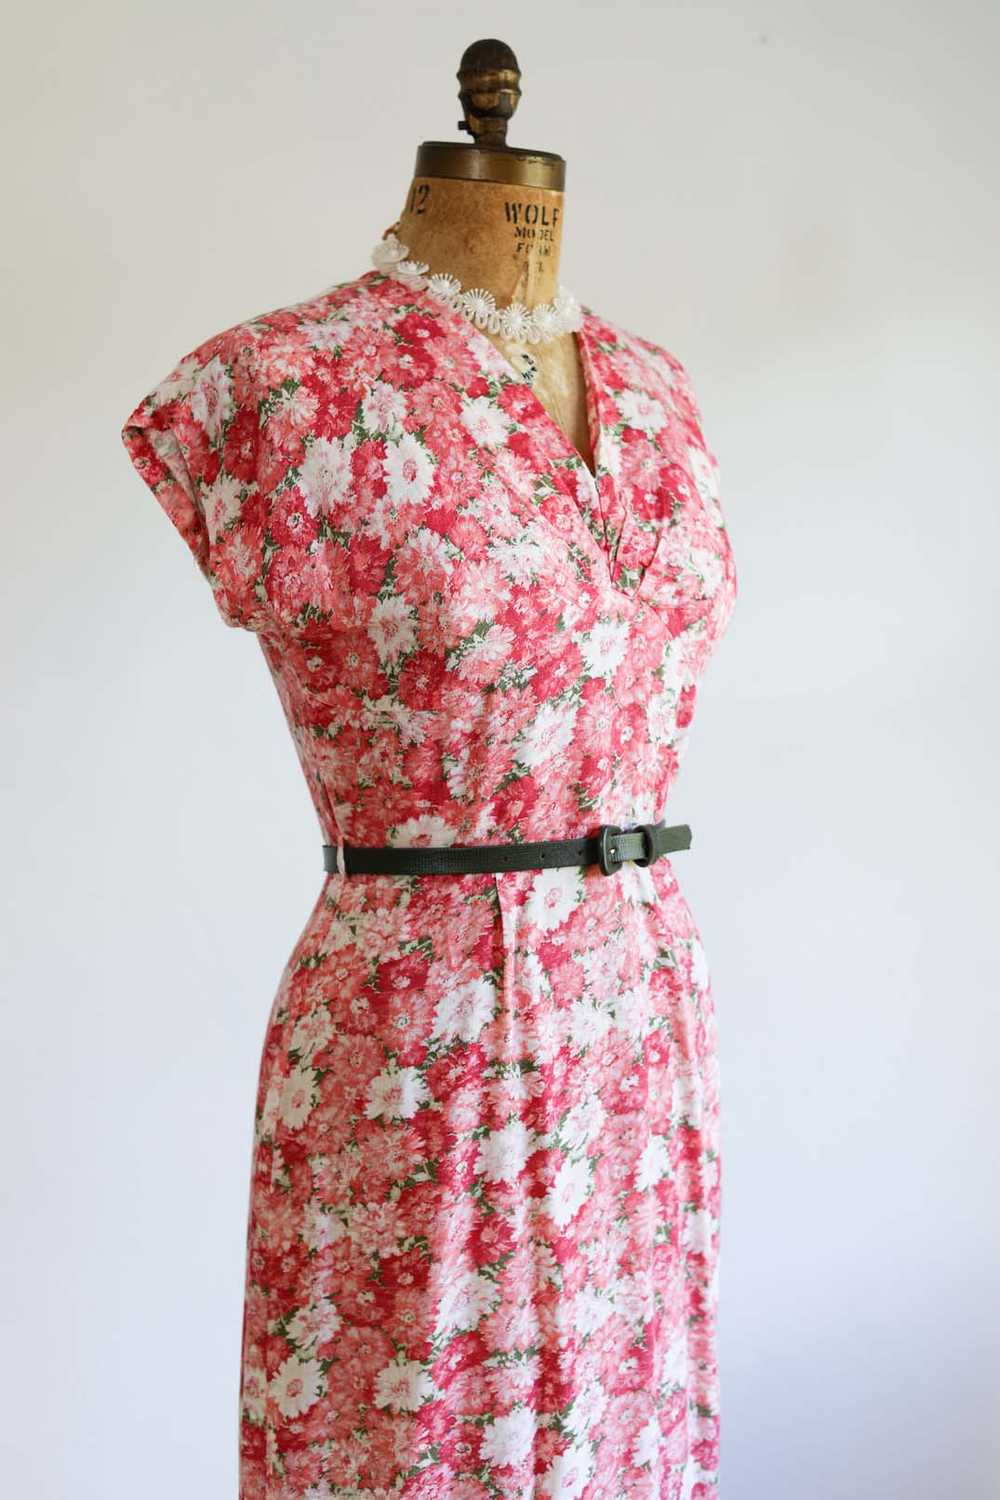 Vintage 1940s to 1950s Dress - STUNNING Gently As… - image 4